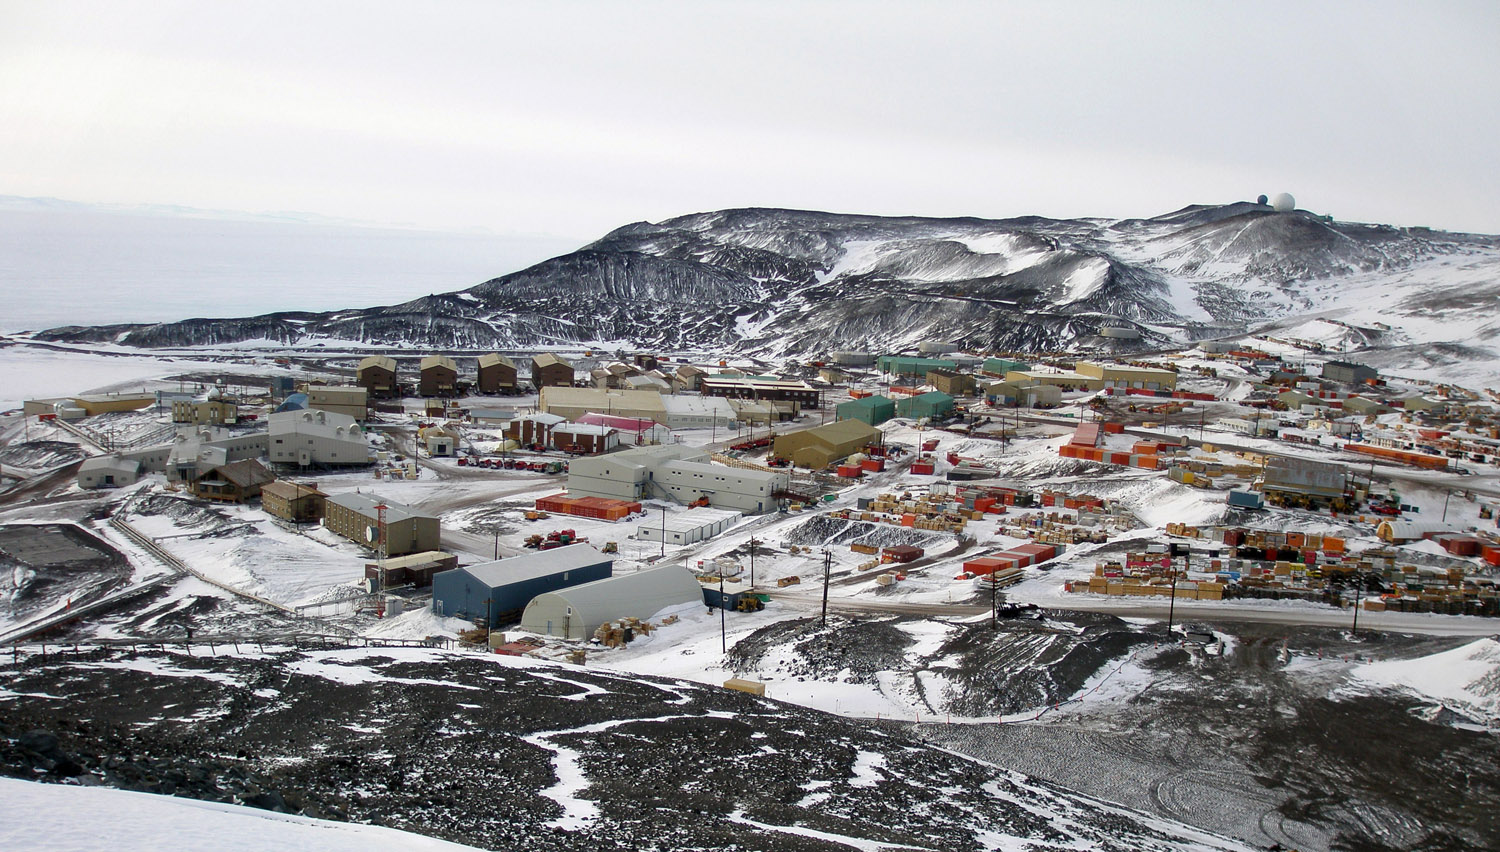 McMurdo Station from a point about one third of the way up Observation Hill